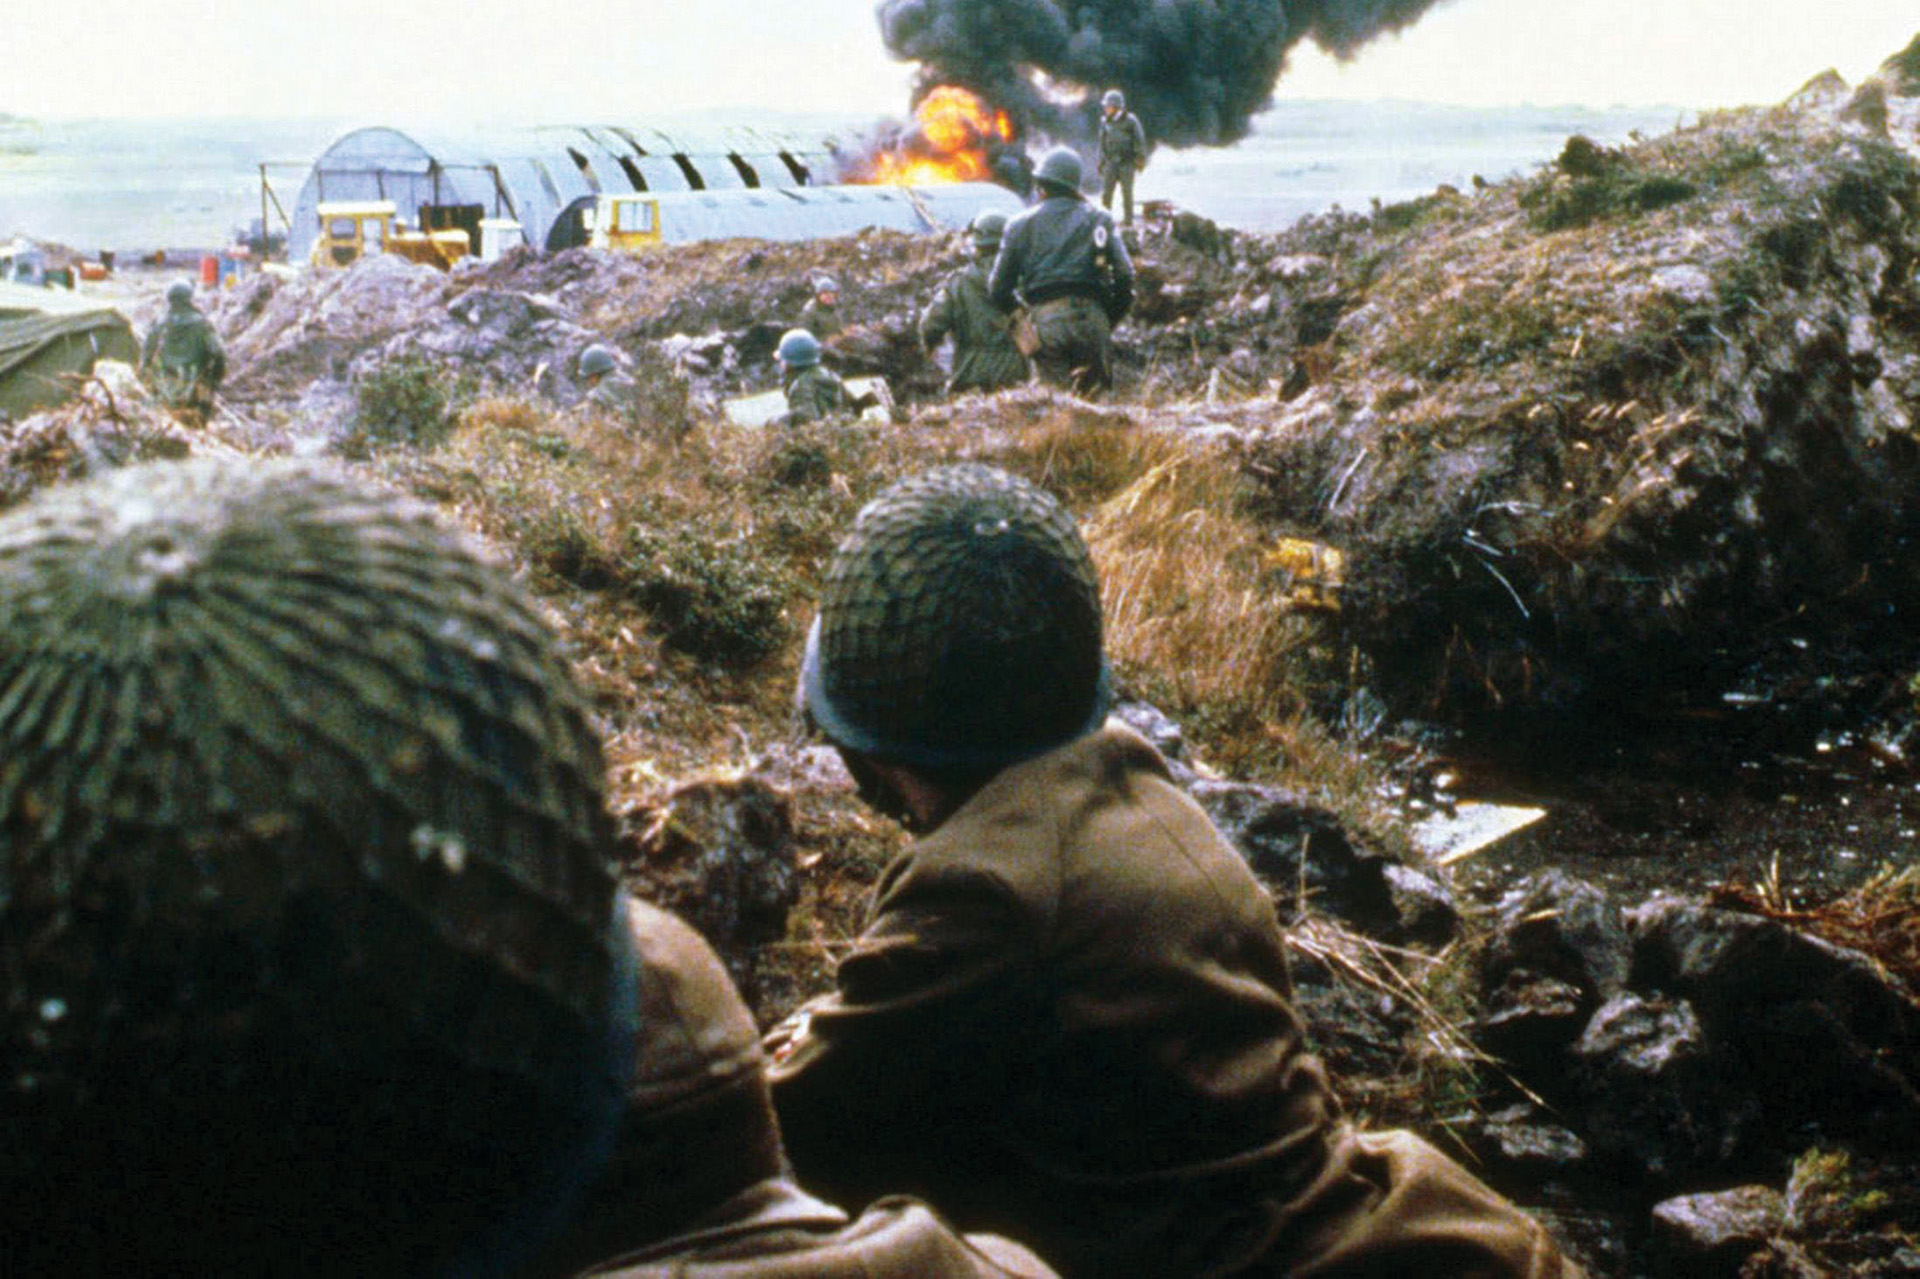 Argentine troops take cover during a Harrier strike on their position near Port Stanley. The soldiers had little luck against the Harriers with Russian-made SAM-7 shoulder-fired antiaircraft missiles. 